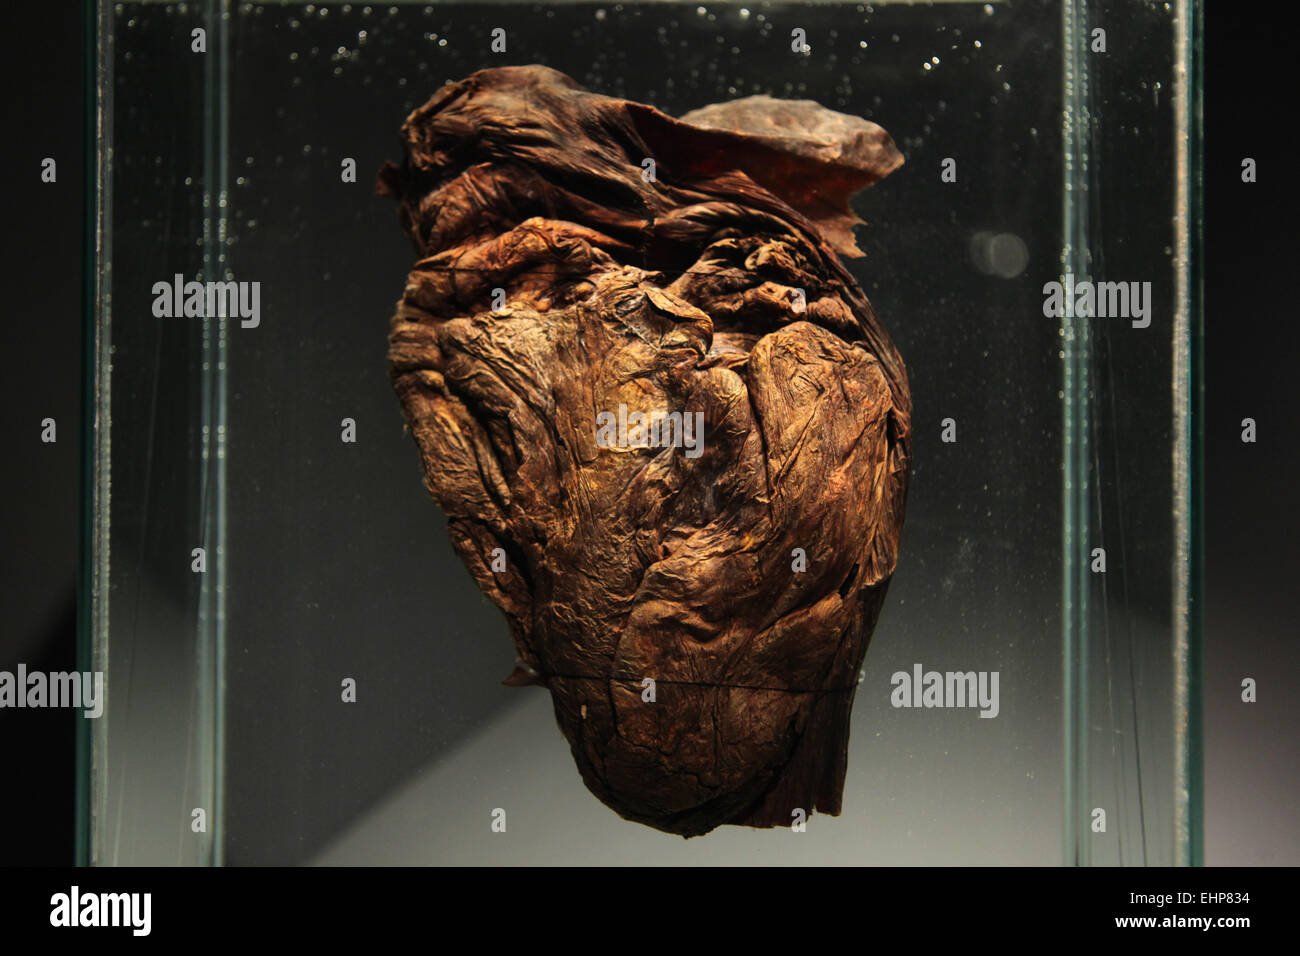 Heart of the baby mammoth Dima at the exhibition 'Ice mummies from Siberia' in the Natural History Museum, Vienna, Austria. Famous mummy of the baby mammoth Dima from the Zoological Museum, Saint Petersburg, was the high attraction at the exhibition 'Mammoths. Ice mummies from Siberia' at the Natural History Museum (Naturhistorisches Museum), Vienna, Austria. Dima the Mammoth was found on the Kolyma River in Magadan Region, Russia. Stock Photo